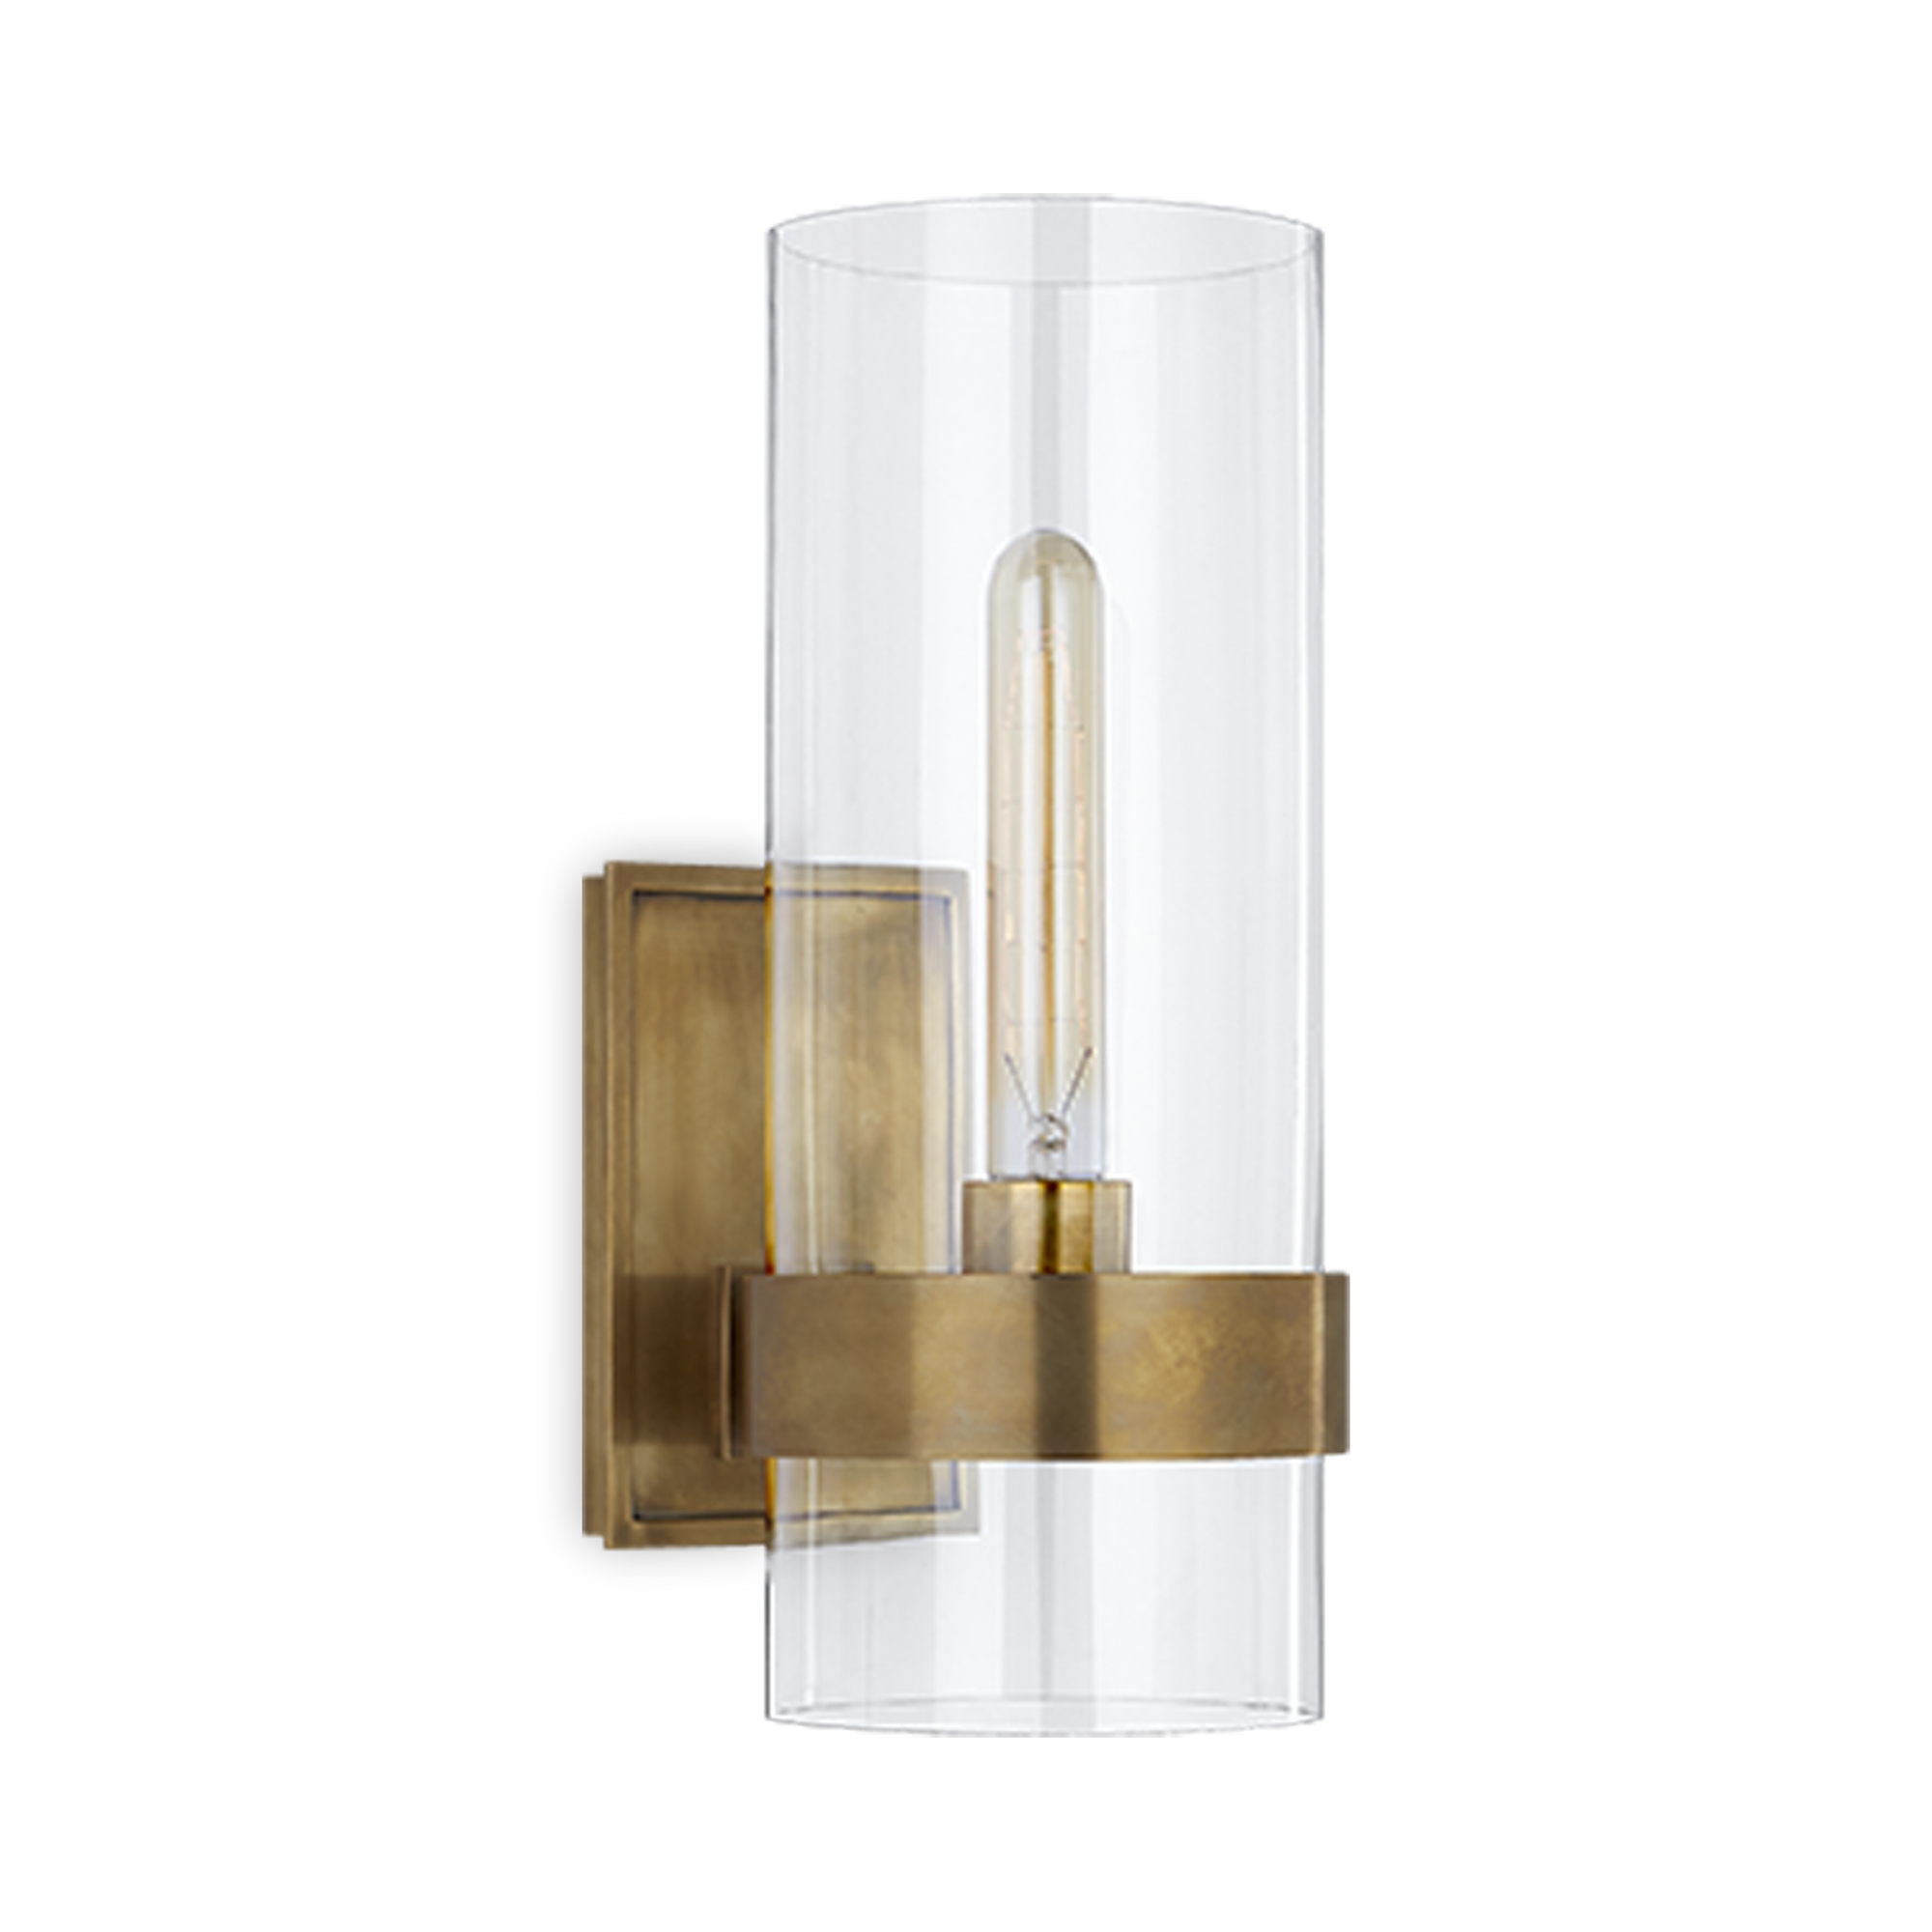 The Presidio Small Wall Light bridges elegance and function, with a modern edge.